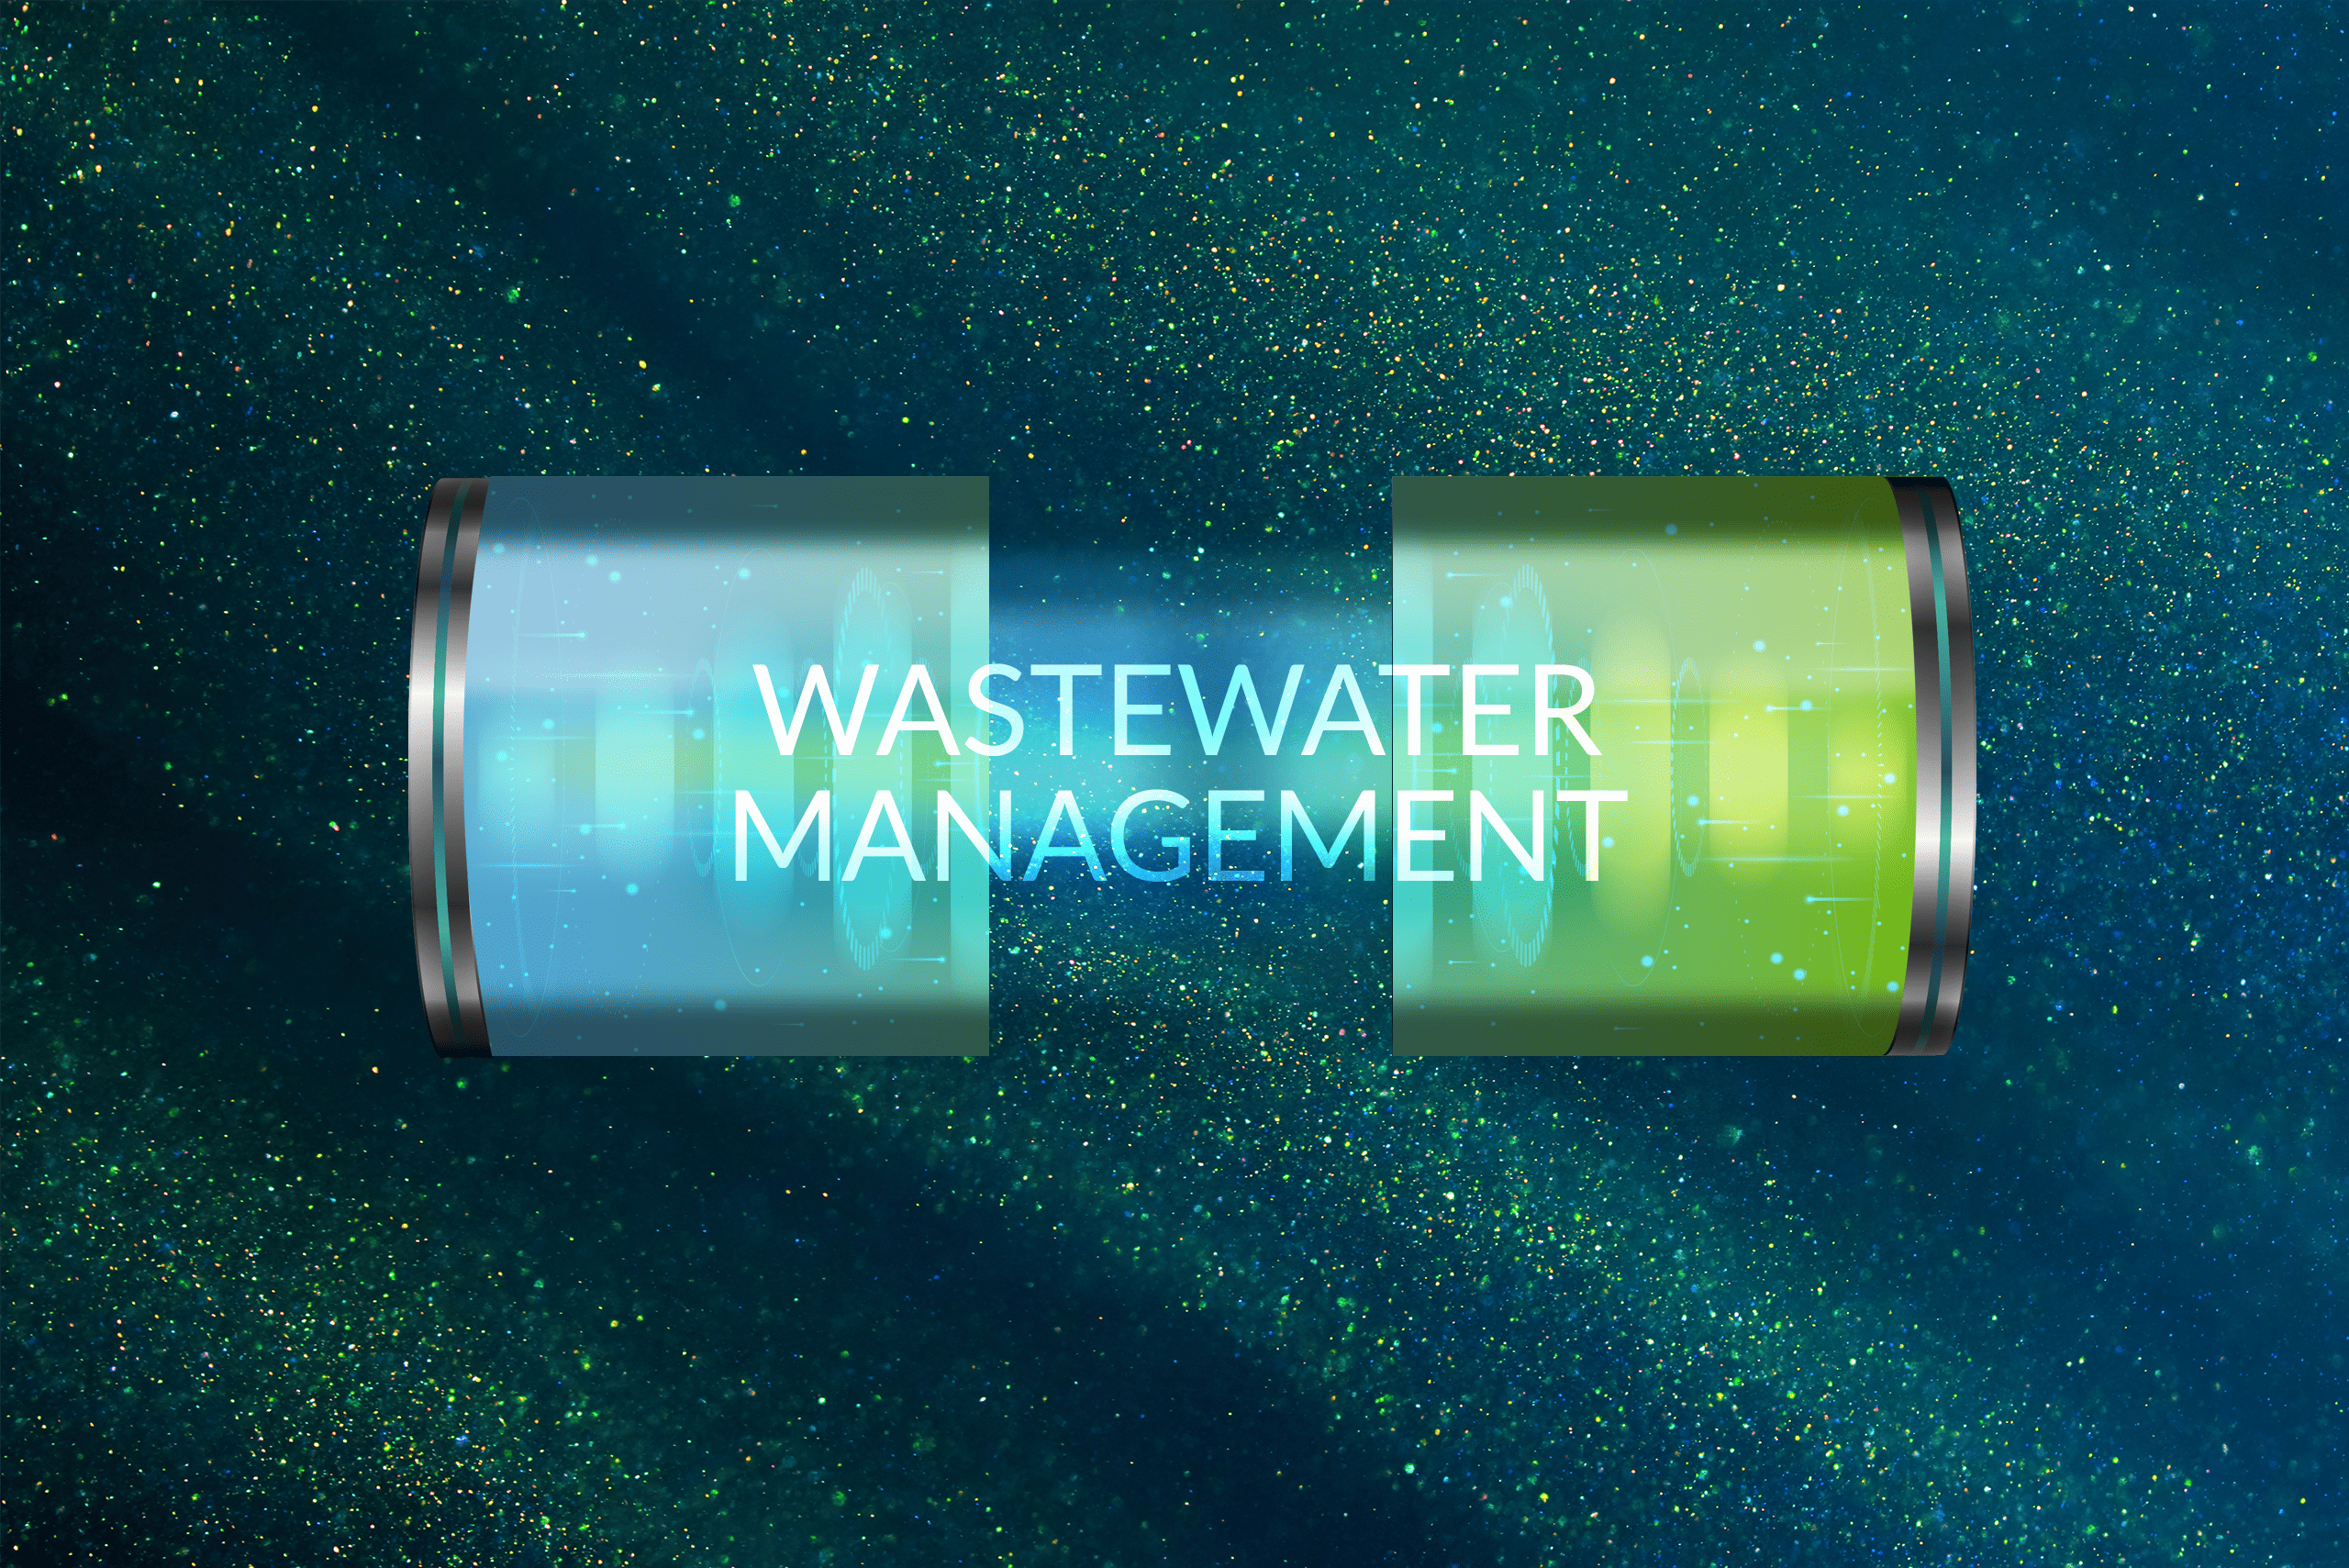 Cleaner waters with Interreg: wastewater management capsule